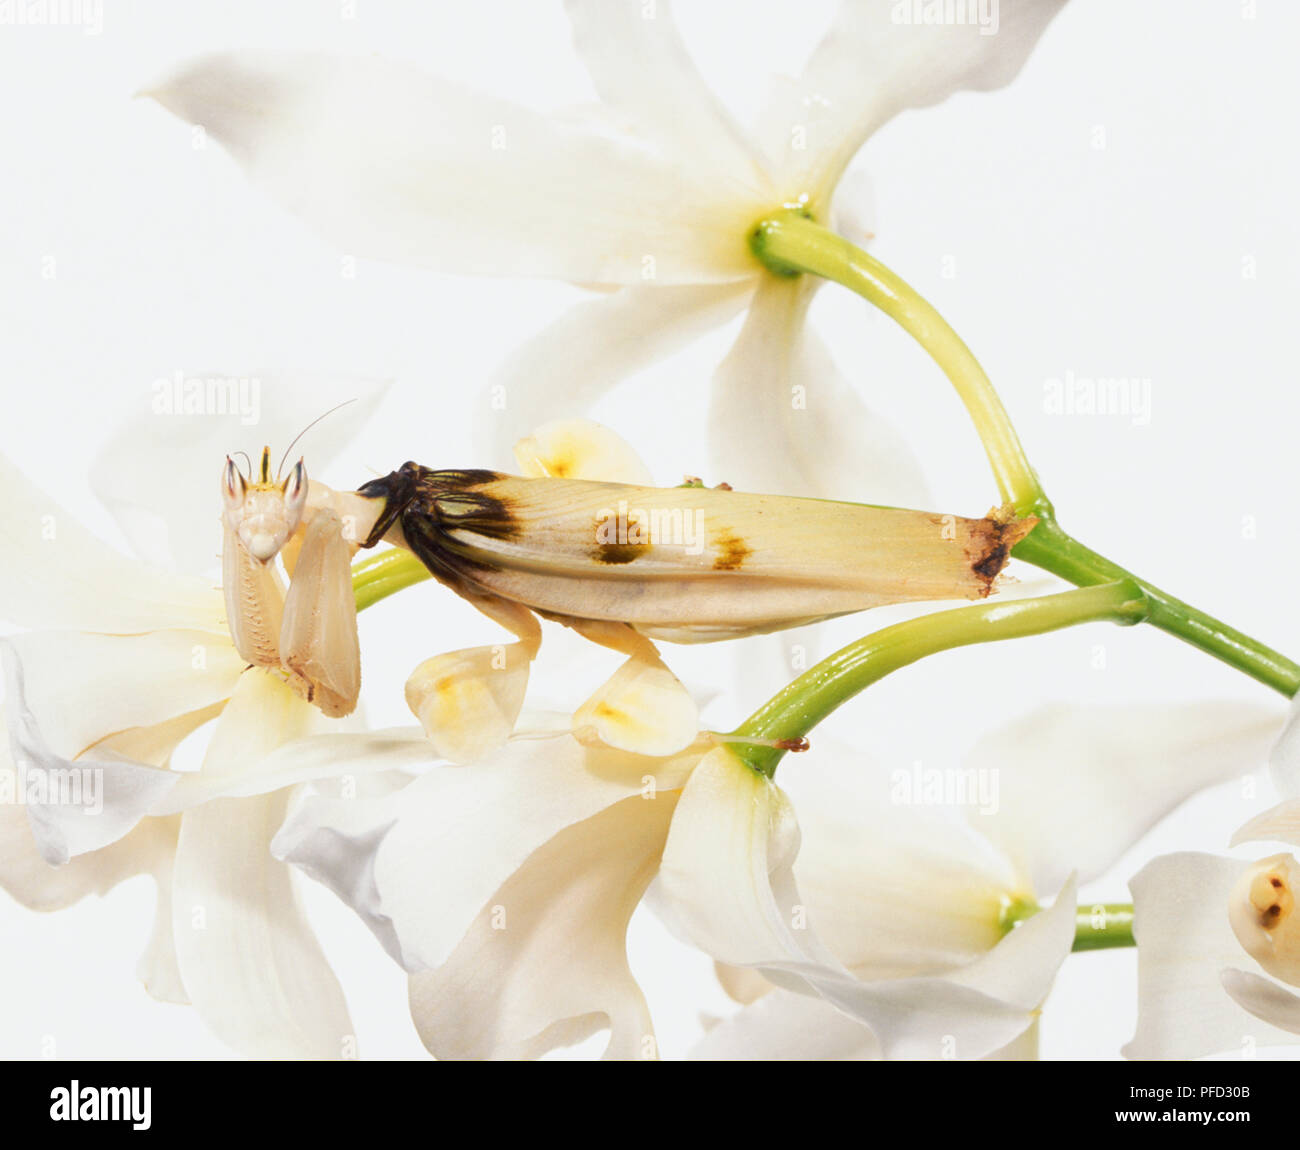 White orchid petals, female Orchid Mantis insect camouflaged amongst them, pale wings, petal-like flaps on legs, large compound eyes, extra large front legs for gripping flower stems and holding tightly onto prey. Stock Photo